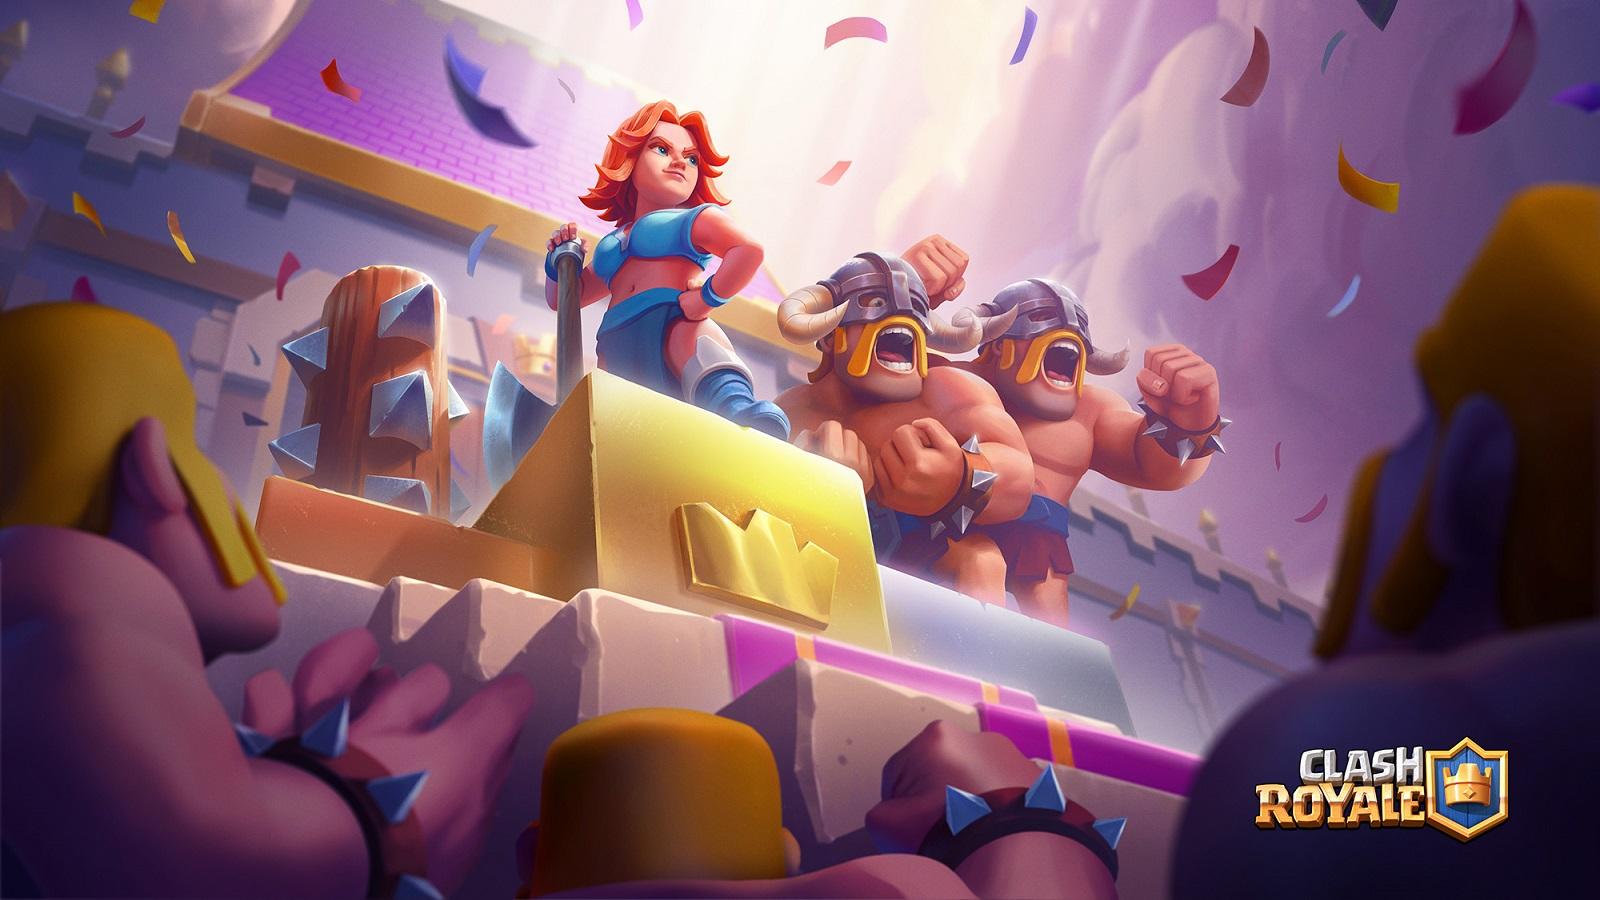 cover art for Clash Royale featuring the Valkyrie and Barbarians.